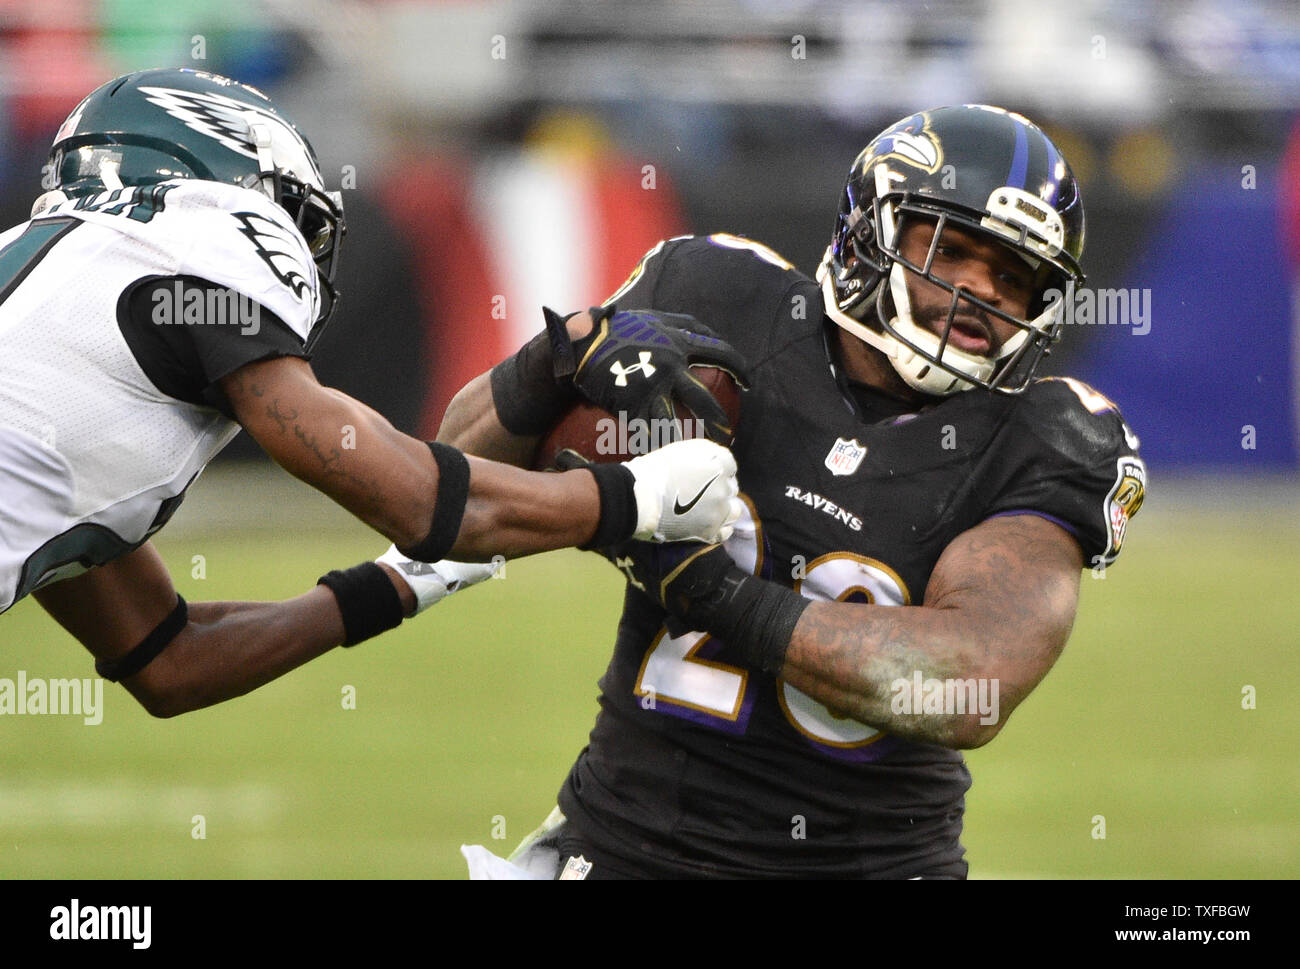 Philadelphia Eagles cornerback Leodis McKelvin (21) tries to strip the ball from Baltimore Ravens running back Terrance West (28) on s first down run during the first half of their NFL game at M&T Bank Stadium in Baltimore, Maryland, December 18, 2016. Photo by David Tulis/UPI Stock Photo